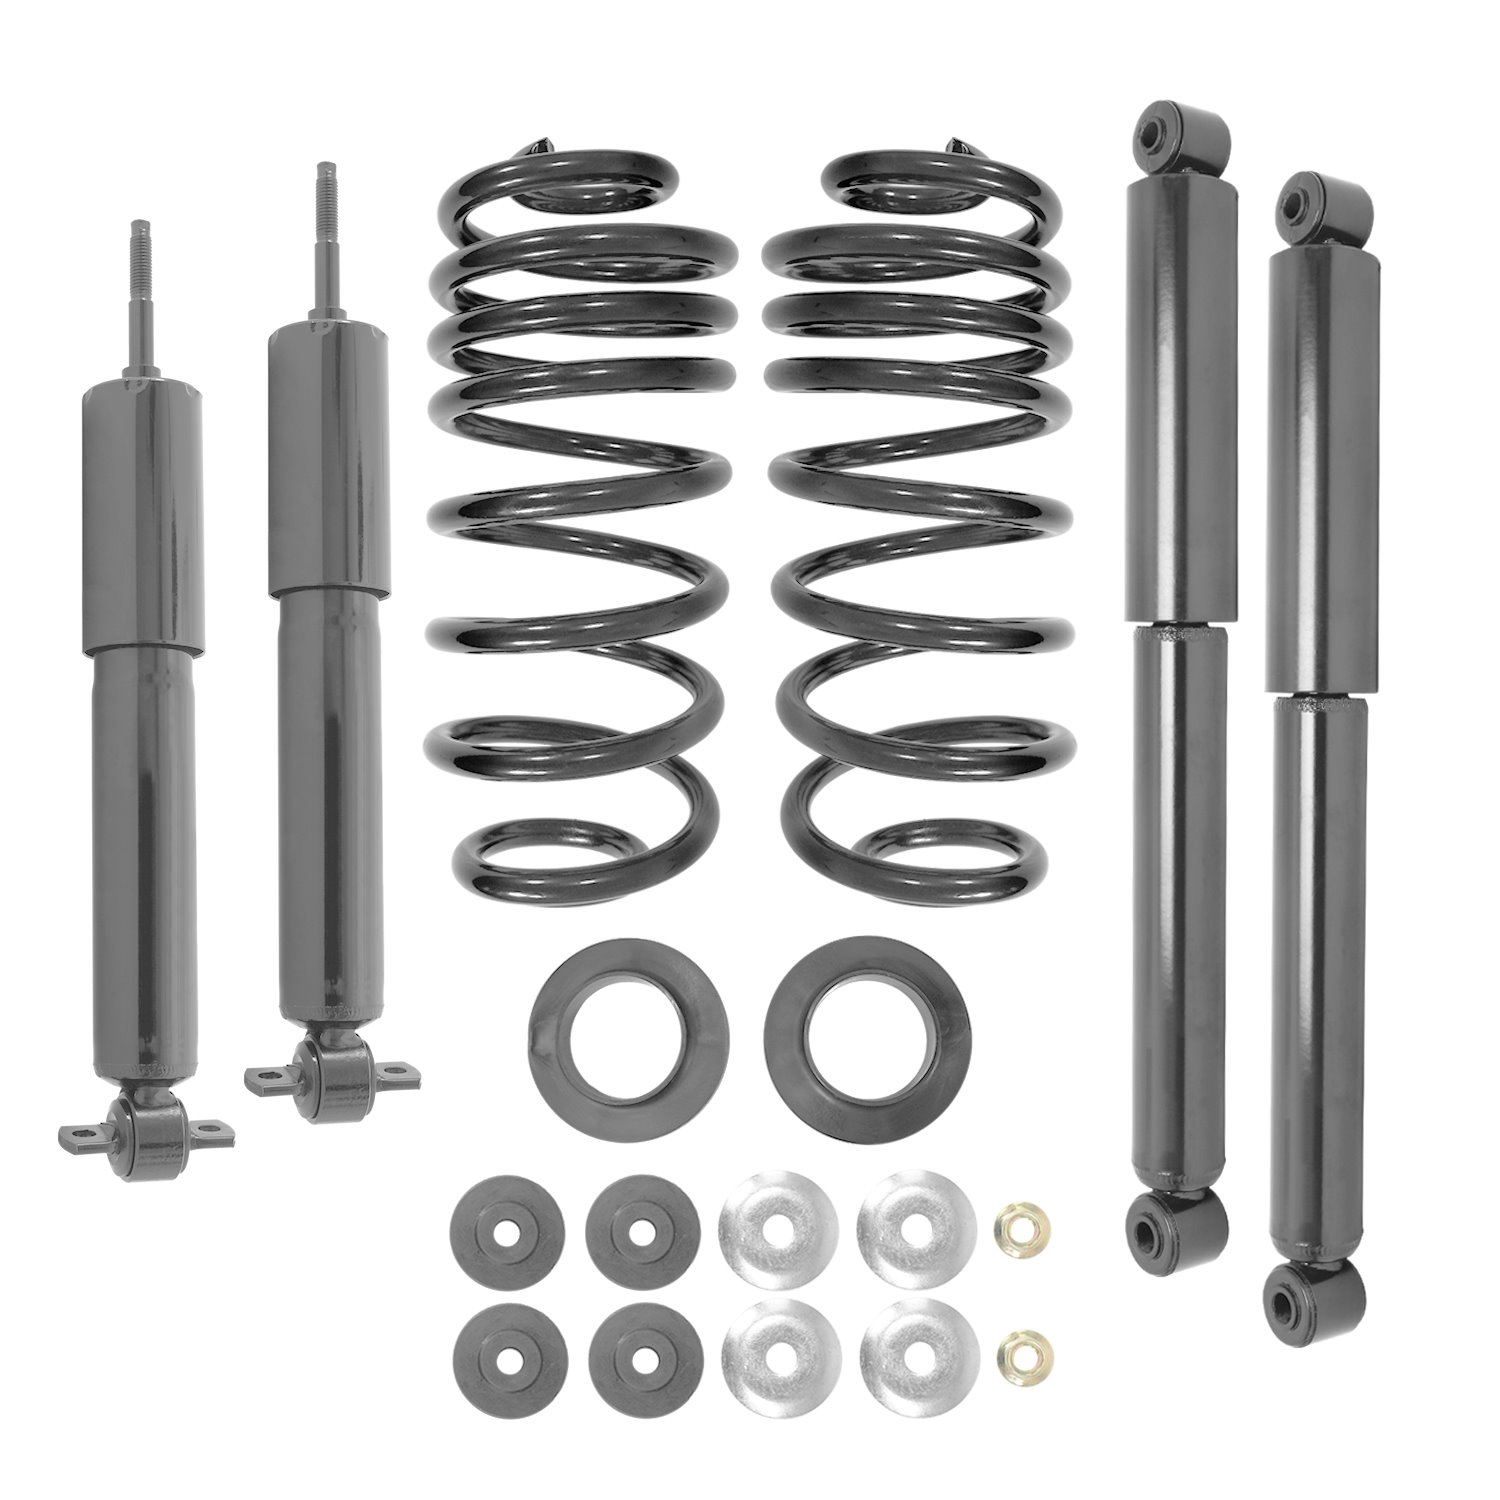 68005c Air Spring To Coil Spring Conversion Kit Fits Select Ford Expedition, Lincoln Navigator